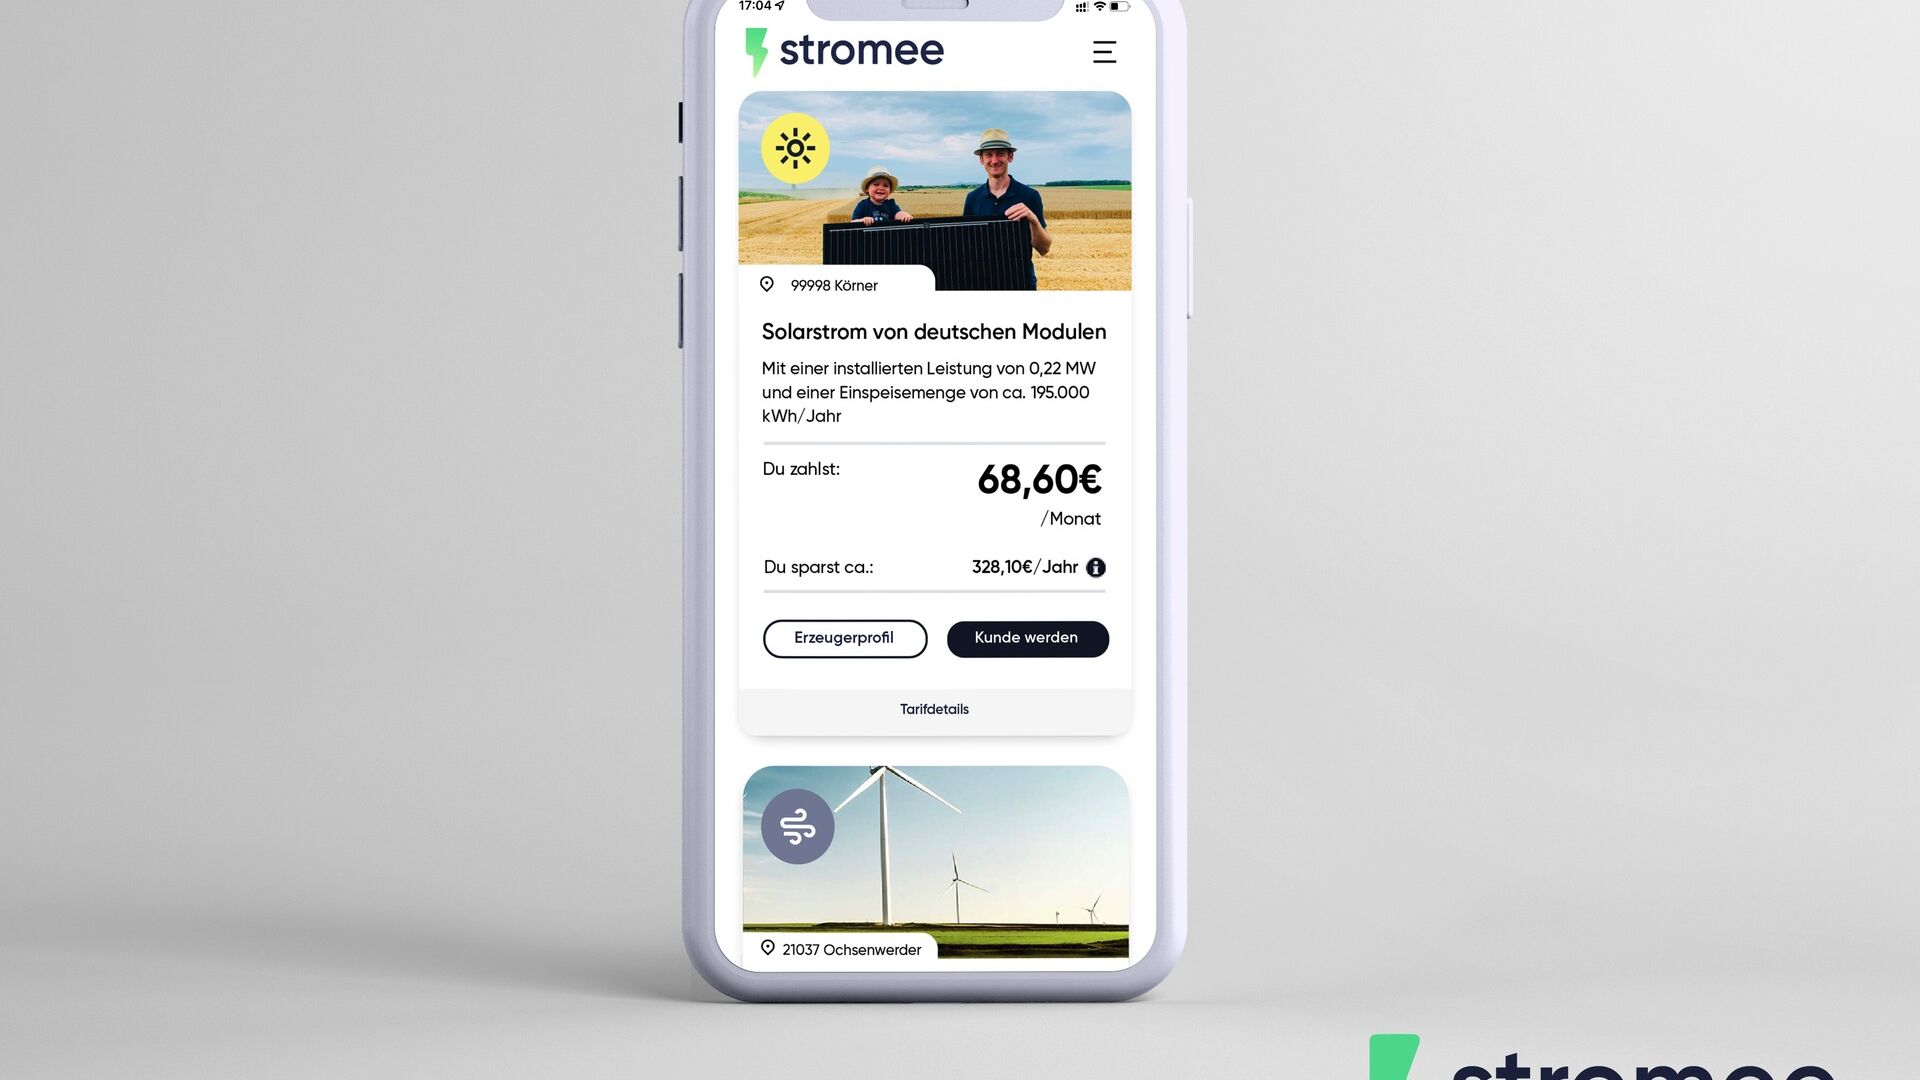 Germany: The stromee company app on a smartphone